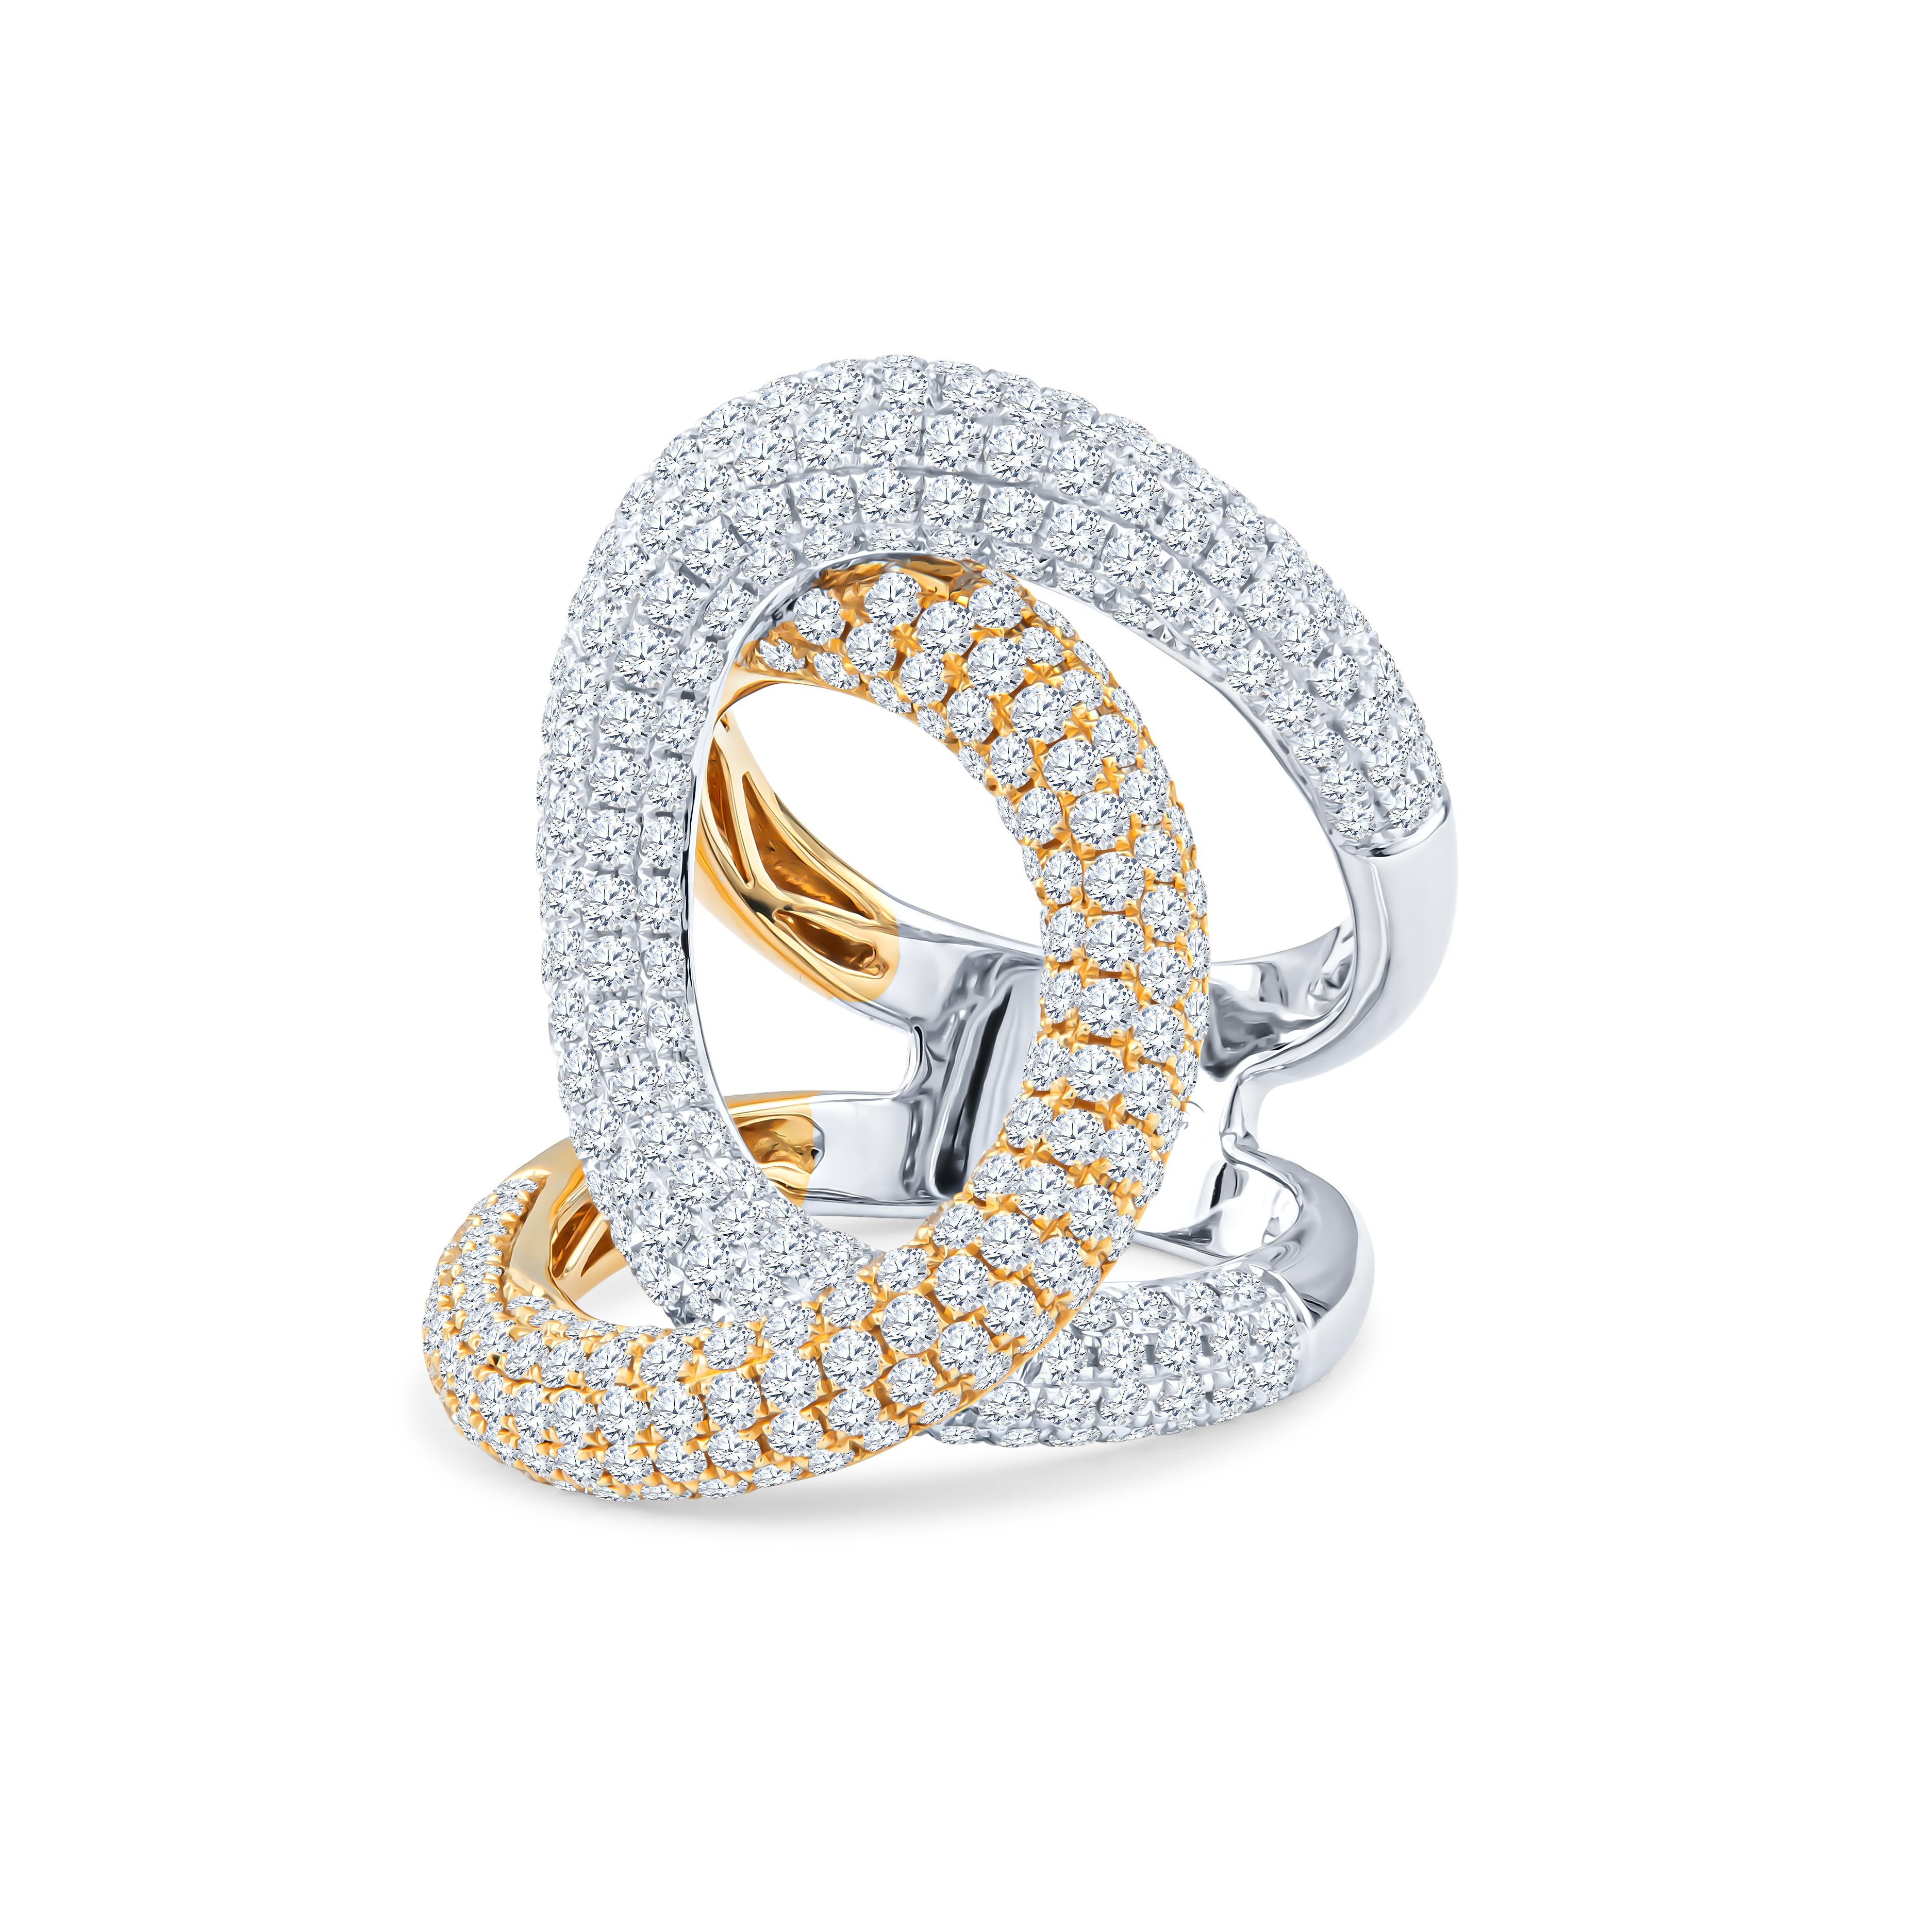 This incredible ring is a swirl of 18kt white and yellow gold, covered in glittering 3.70ct round pave diamonds. The ring is a size 6.5, but it can be resized upon request.